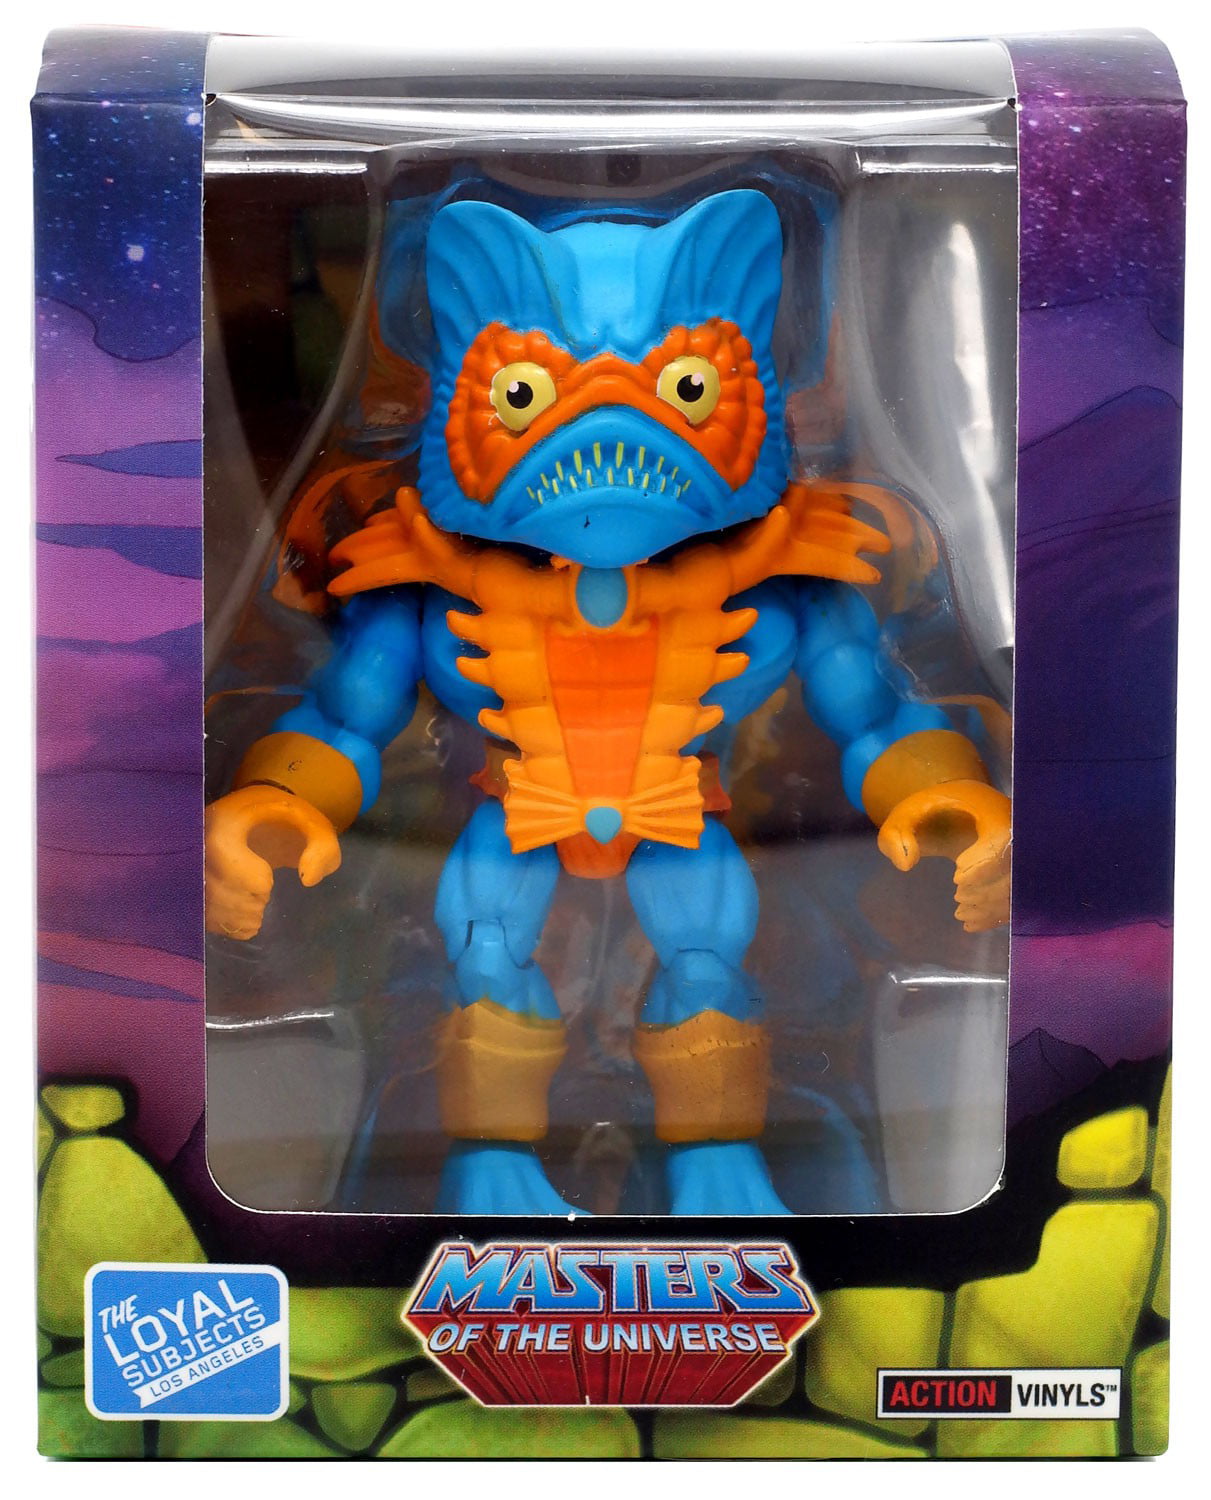 MASTERS OF THE UNIVERSE MOTU LOYAL SUBJECTS VINYL WAVE 2 MER-MAN 1 OUT OF 6 NEW 